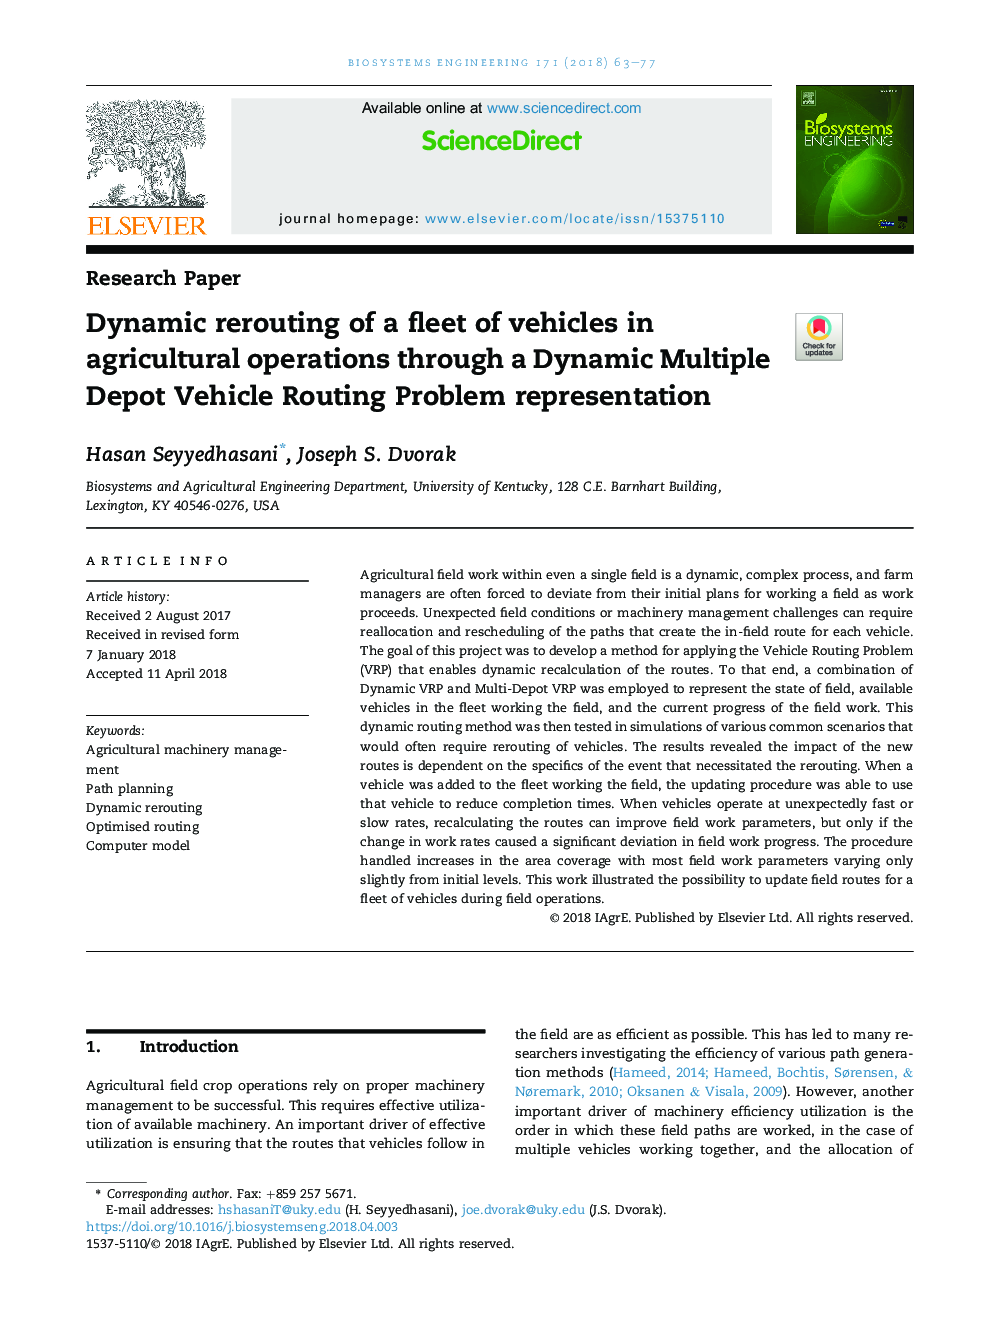 Dynamic rerouting of a fleet of vehicles in agricultural operations through a Dynamic Multiple Depot Vehicle Routing Problem representation